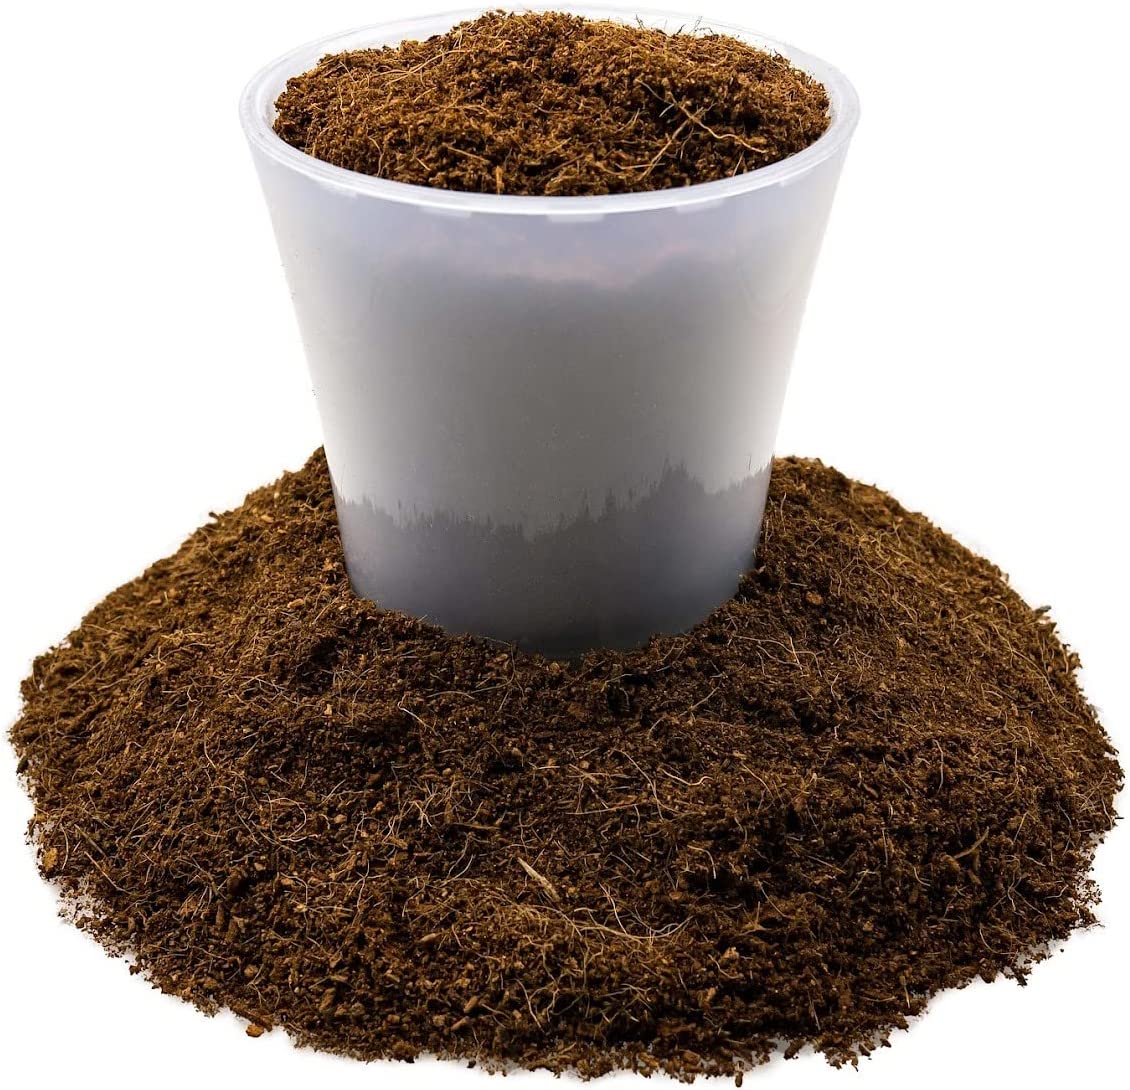 ⭐ PREMIUM Organic Coconut Coir Mix for Home Gardening - All Natural Soil Amendment - PH Balanced and Double Washed Coco Coir by ://N ★ LOVA - 1 Quart Bag - image 4 of 4